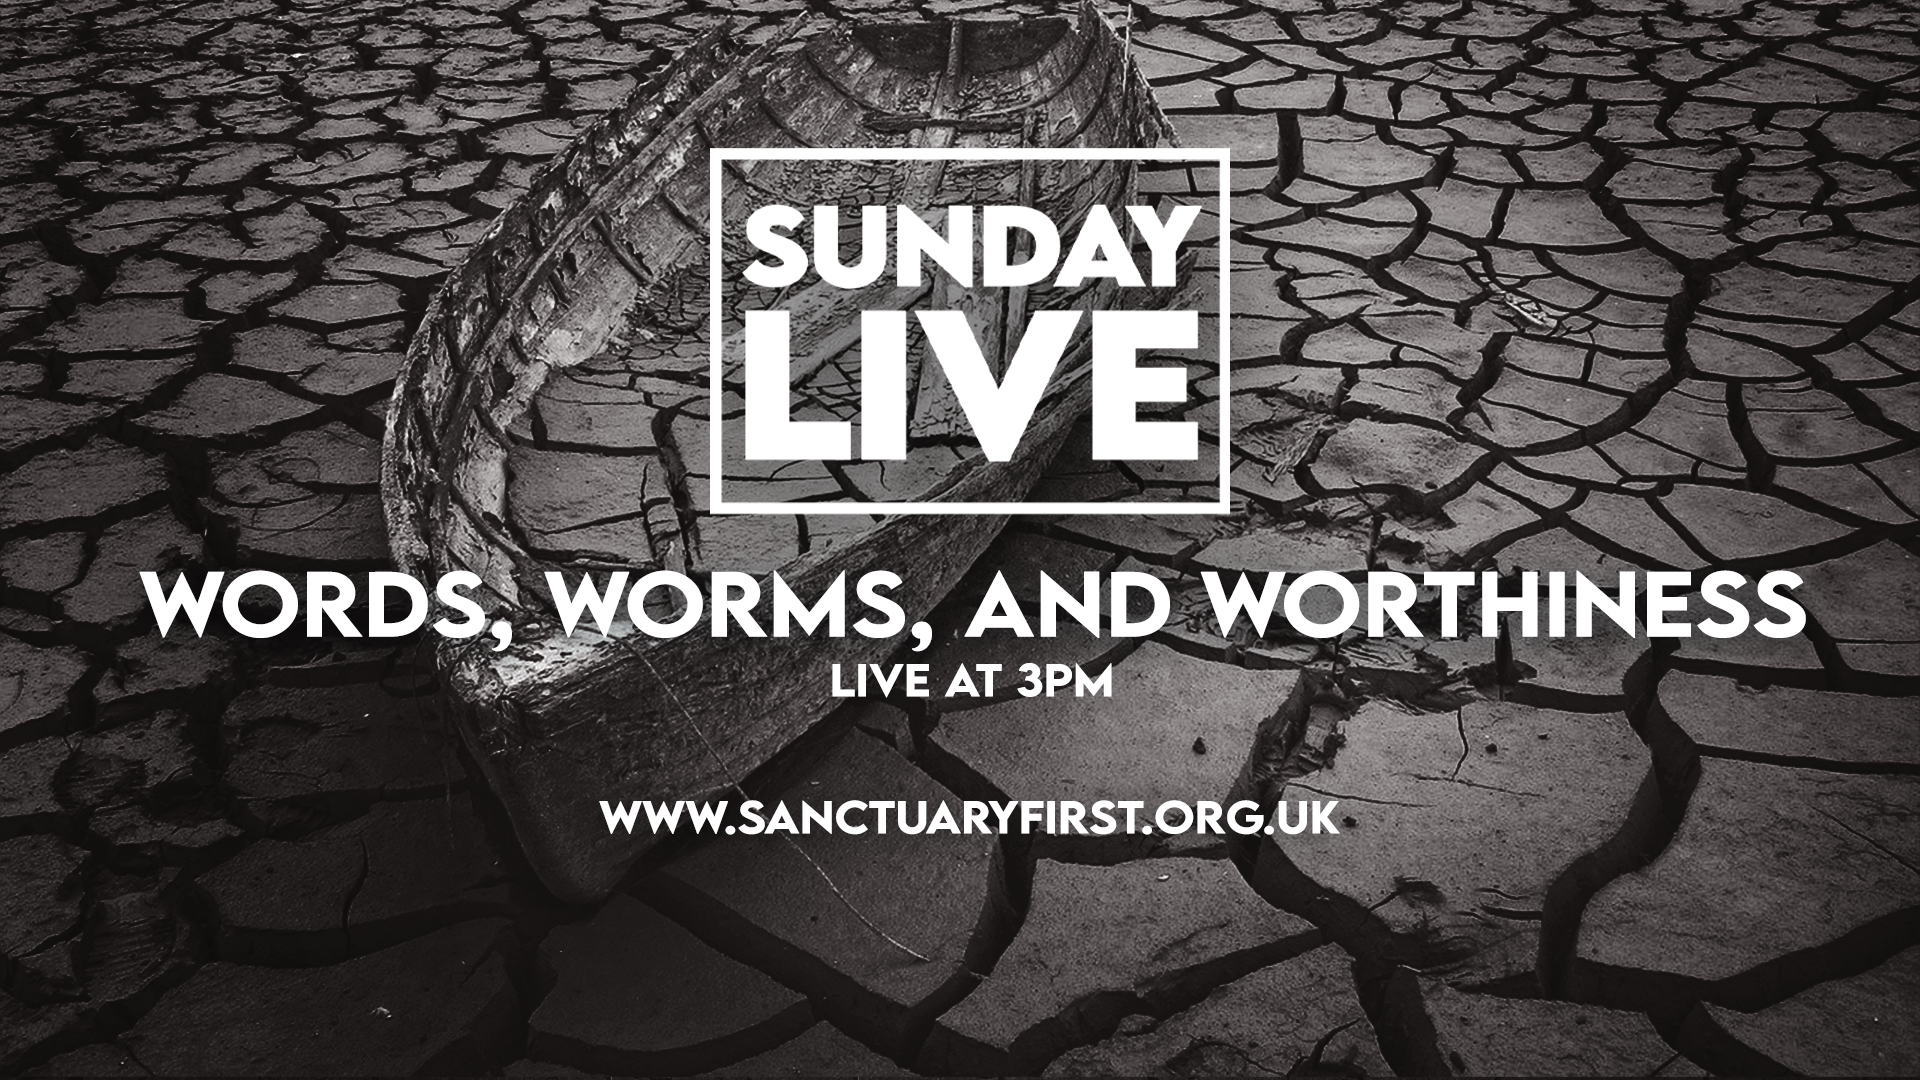 Sunday Live - Words, worms, and worthiness